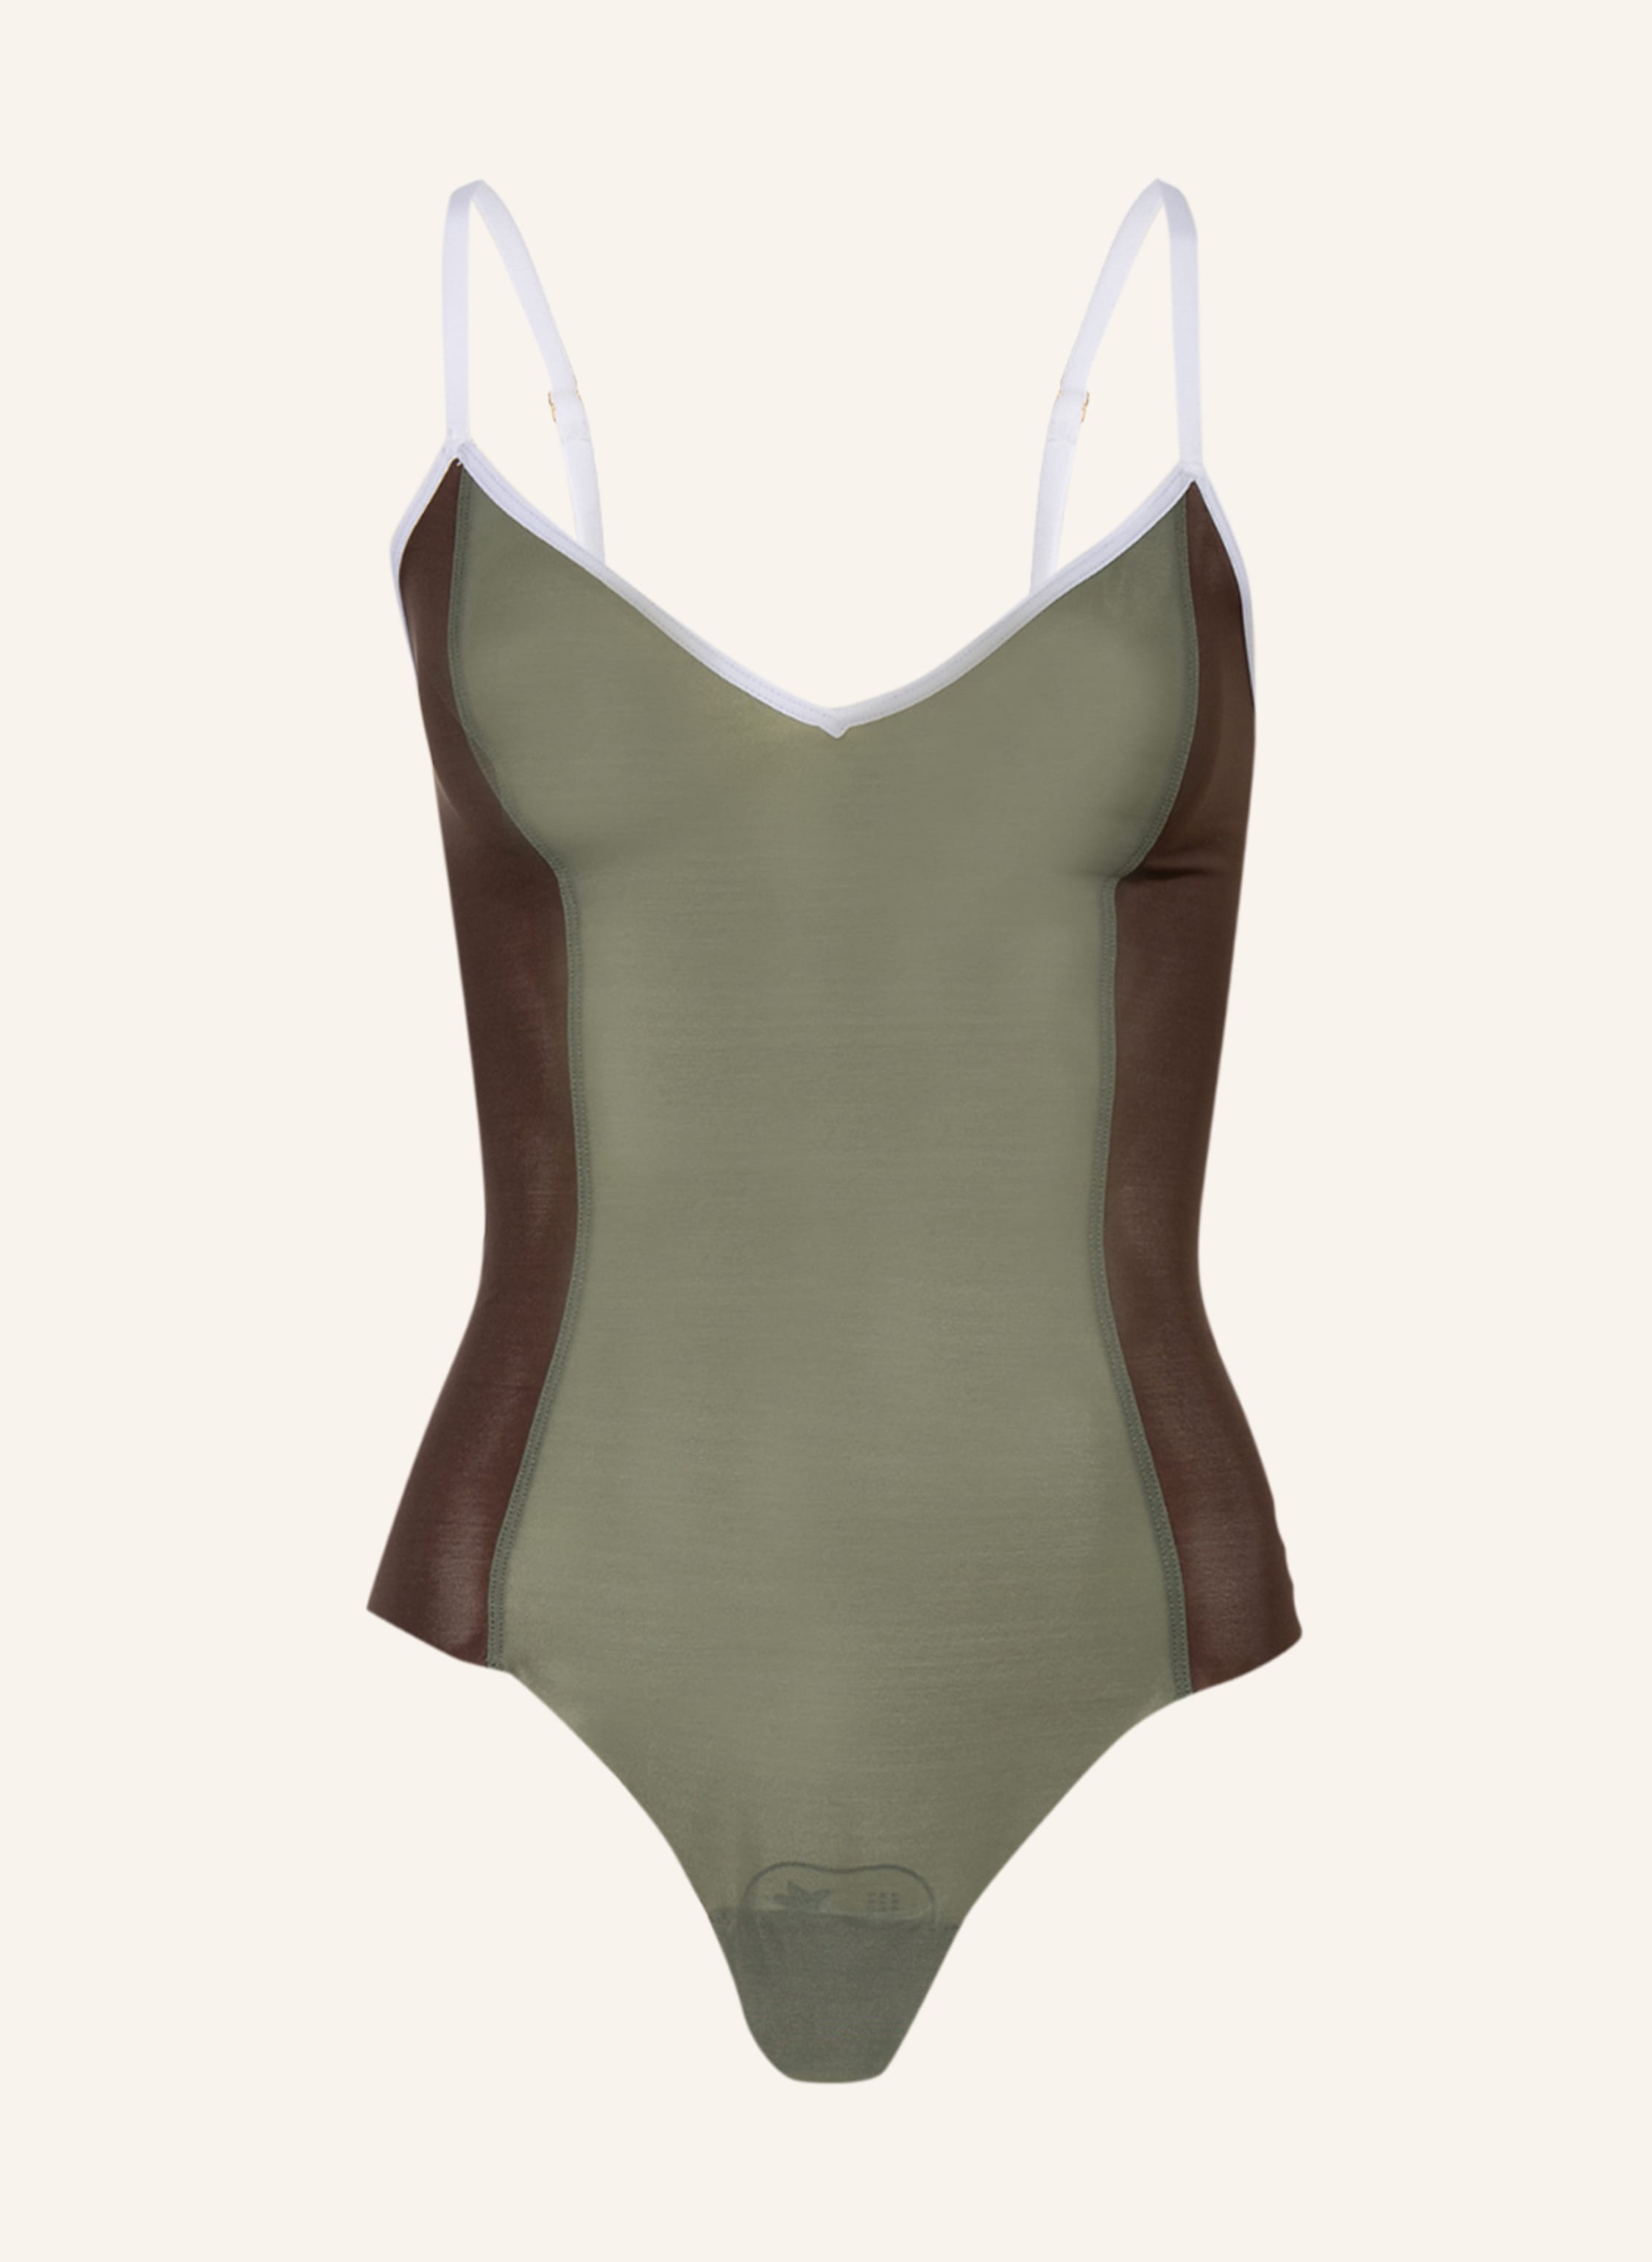 ITEM m6 Thong bodysuit ALL MESH with shaping effect in olive